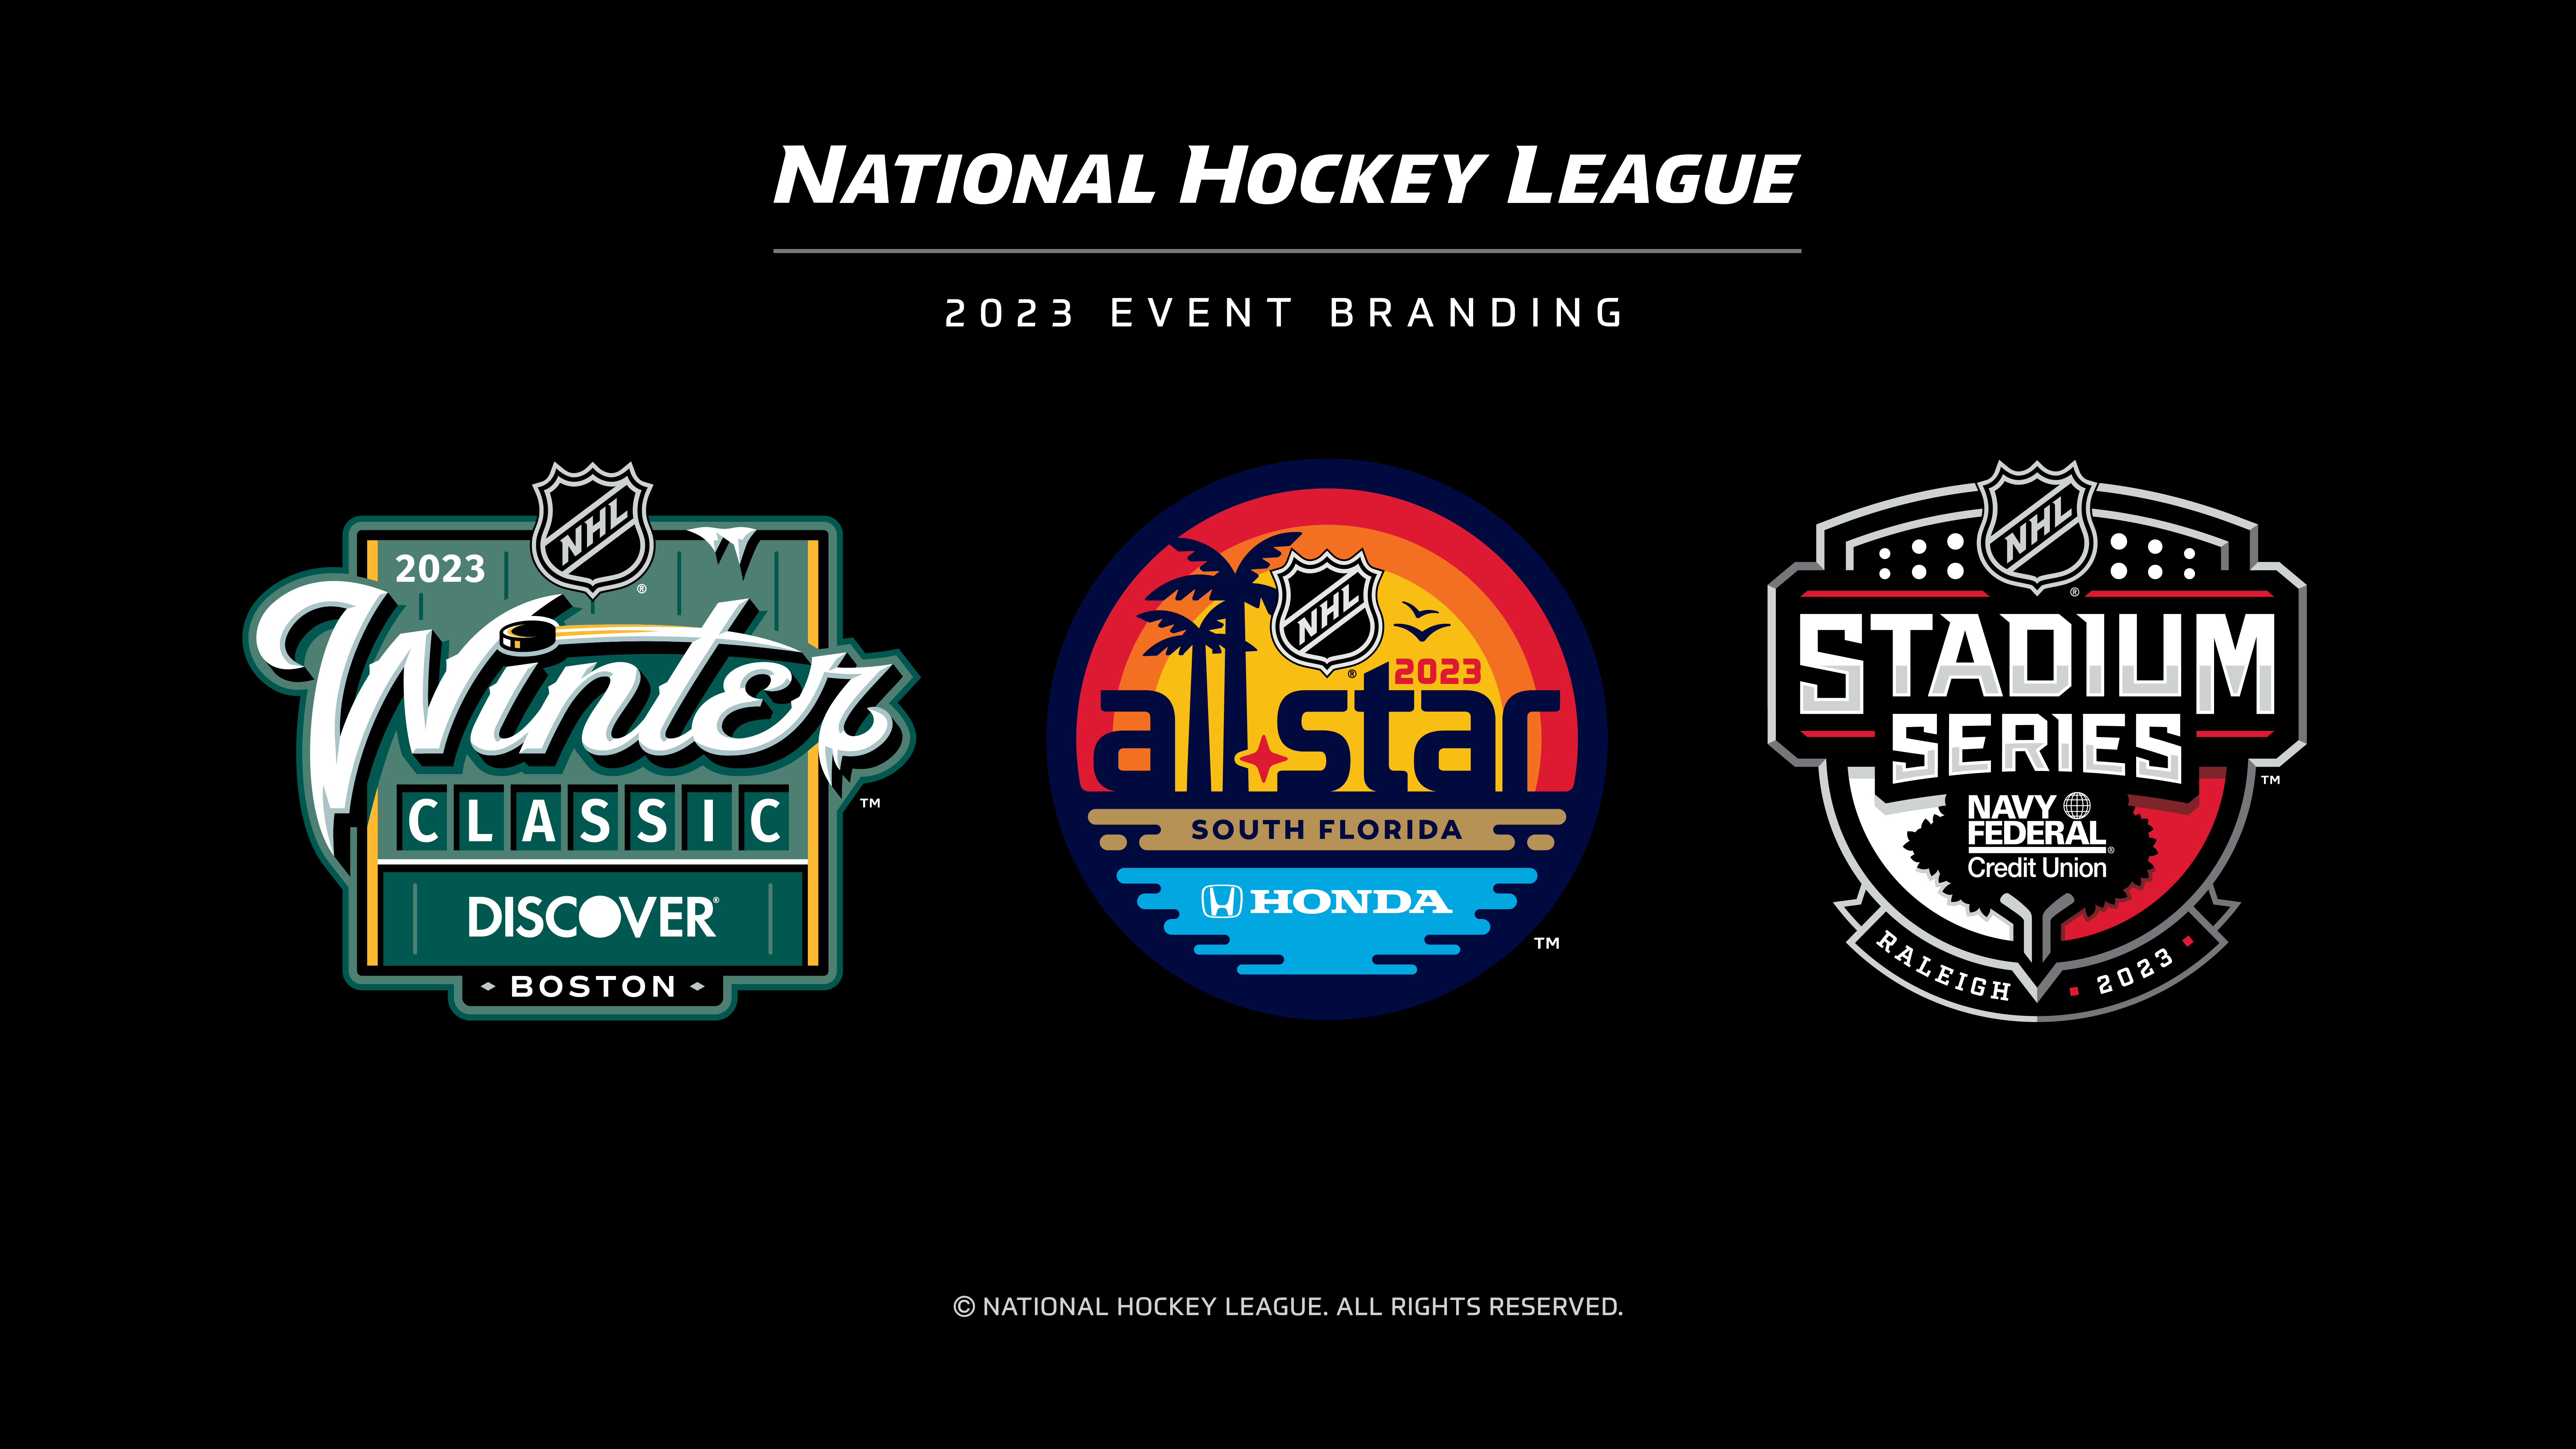 NHL News Logos Unveiled for the 2023 Discover NHL Winter Classic, 2023